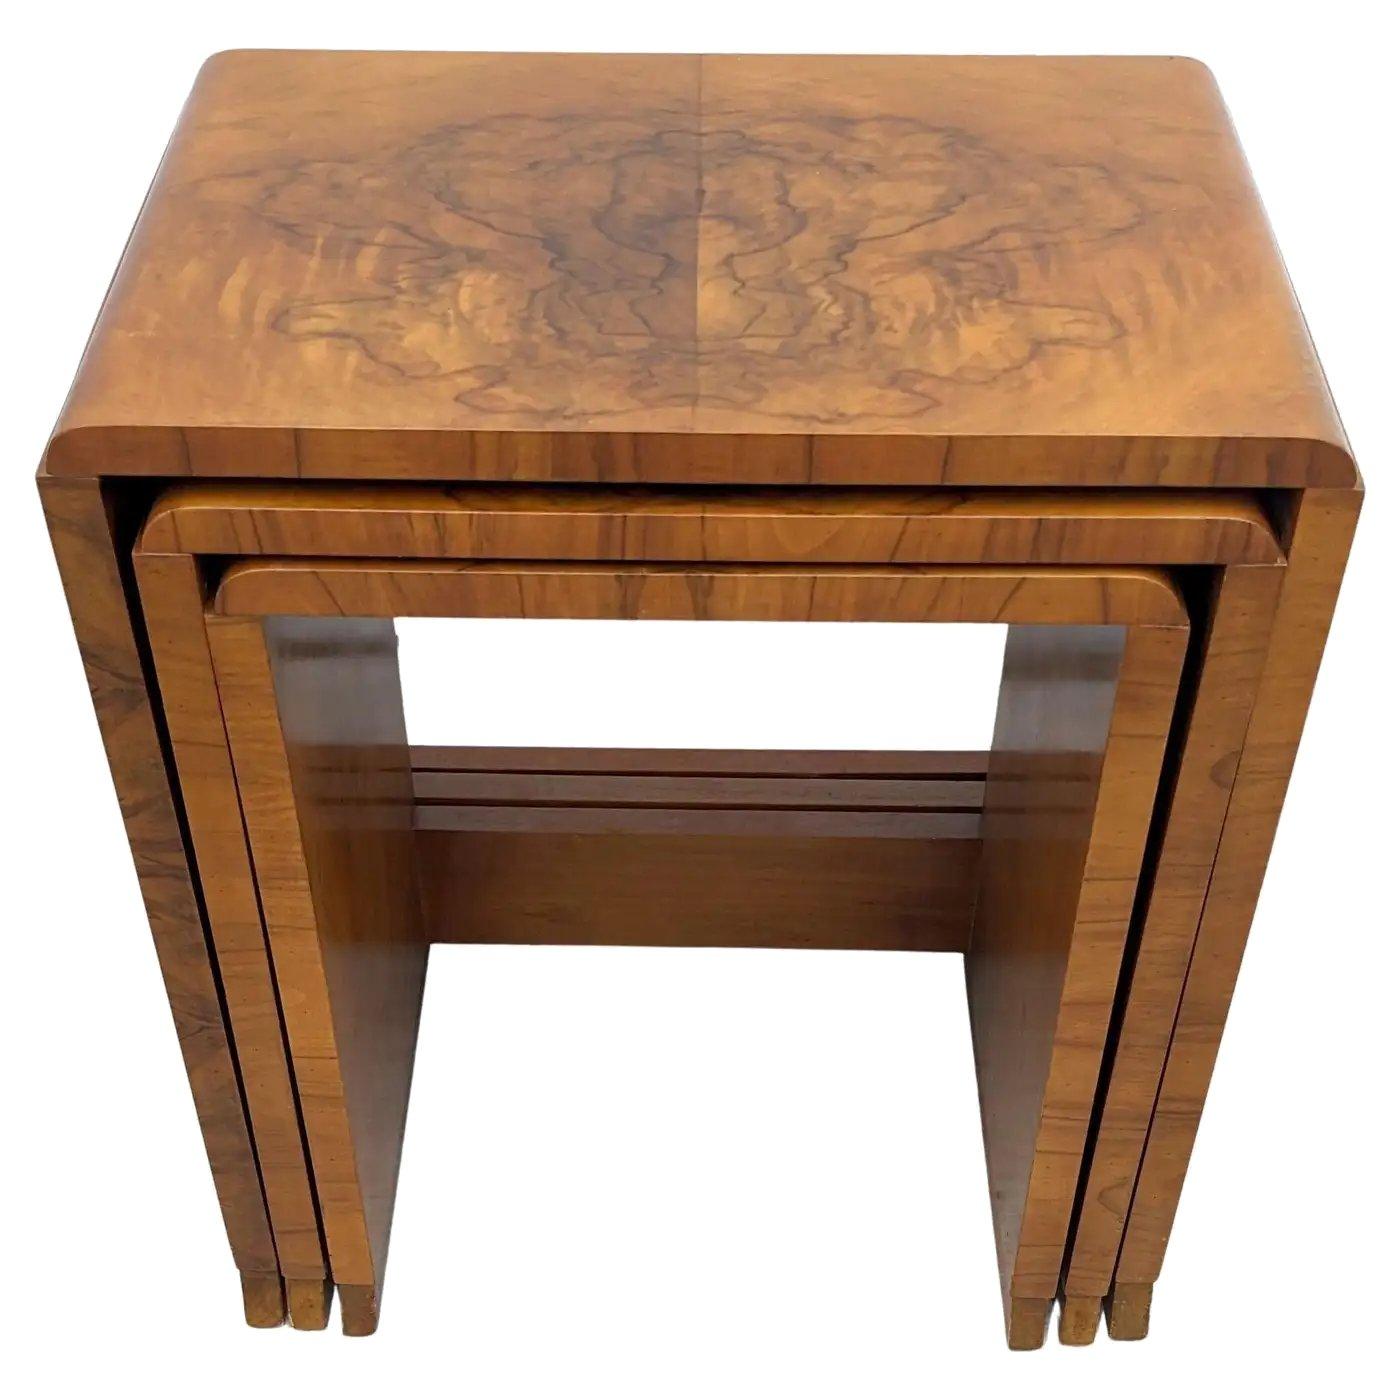 Walnut Art Deco H & L Epstein Rare Set of Three Nest of Tables, English, c1930s For Sale